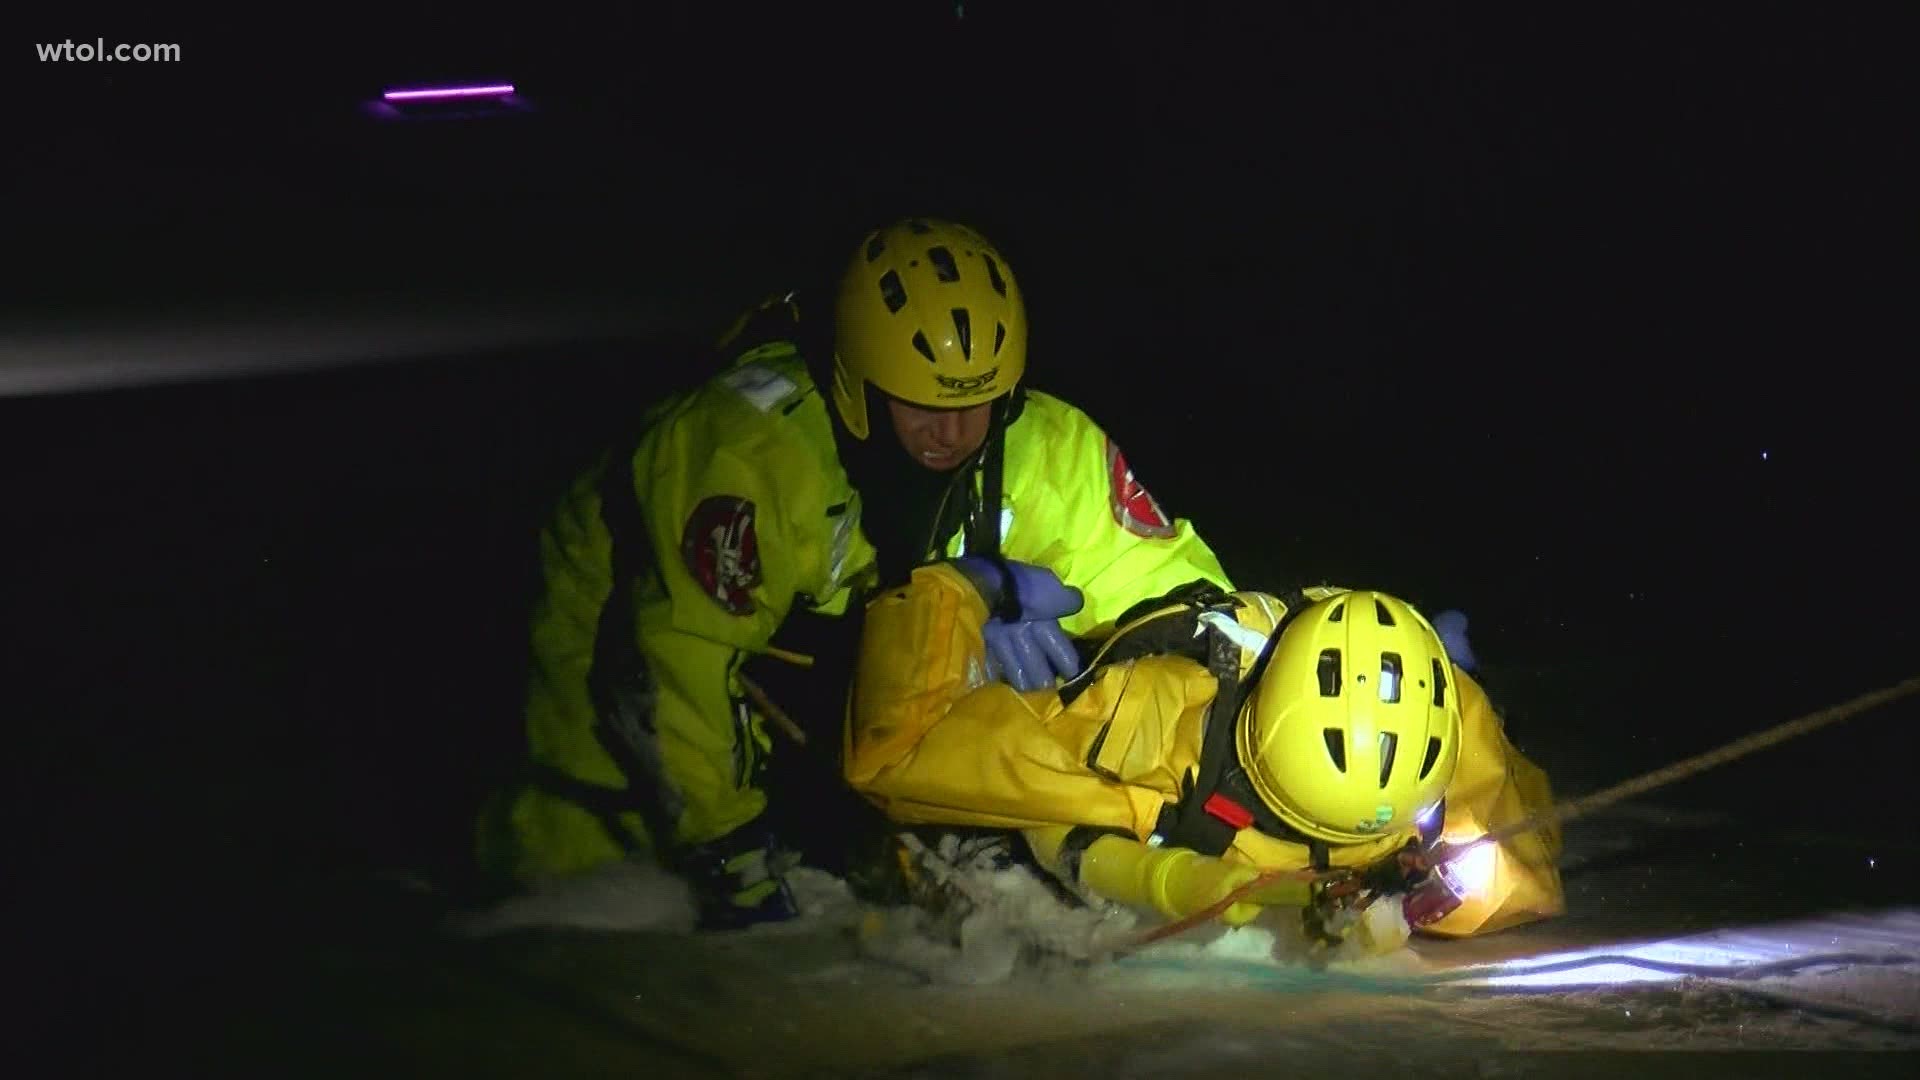 Washington Township Fire Department held a drill with its ice rescue team Wednesday night to practice for a rescue call.